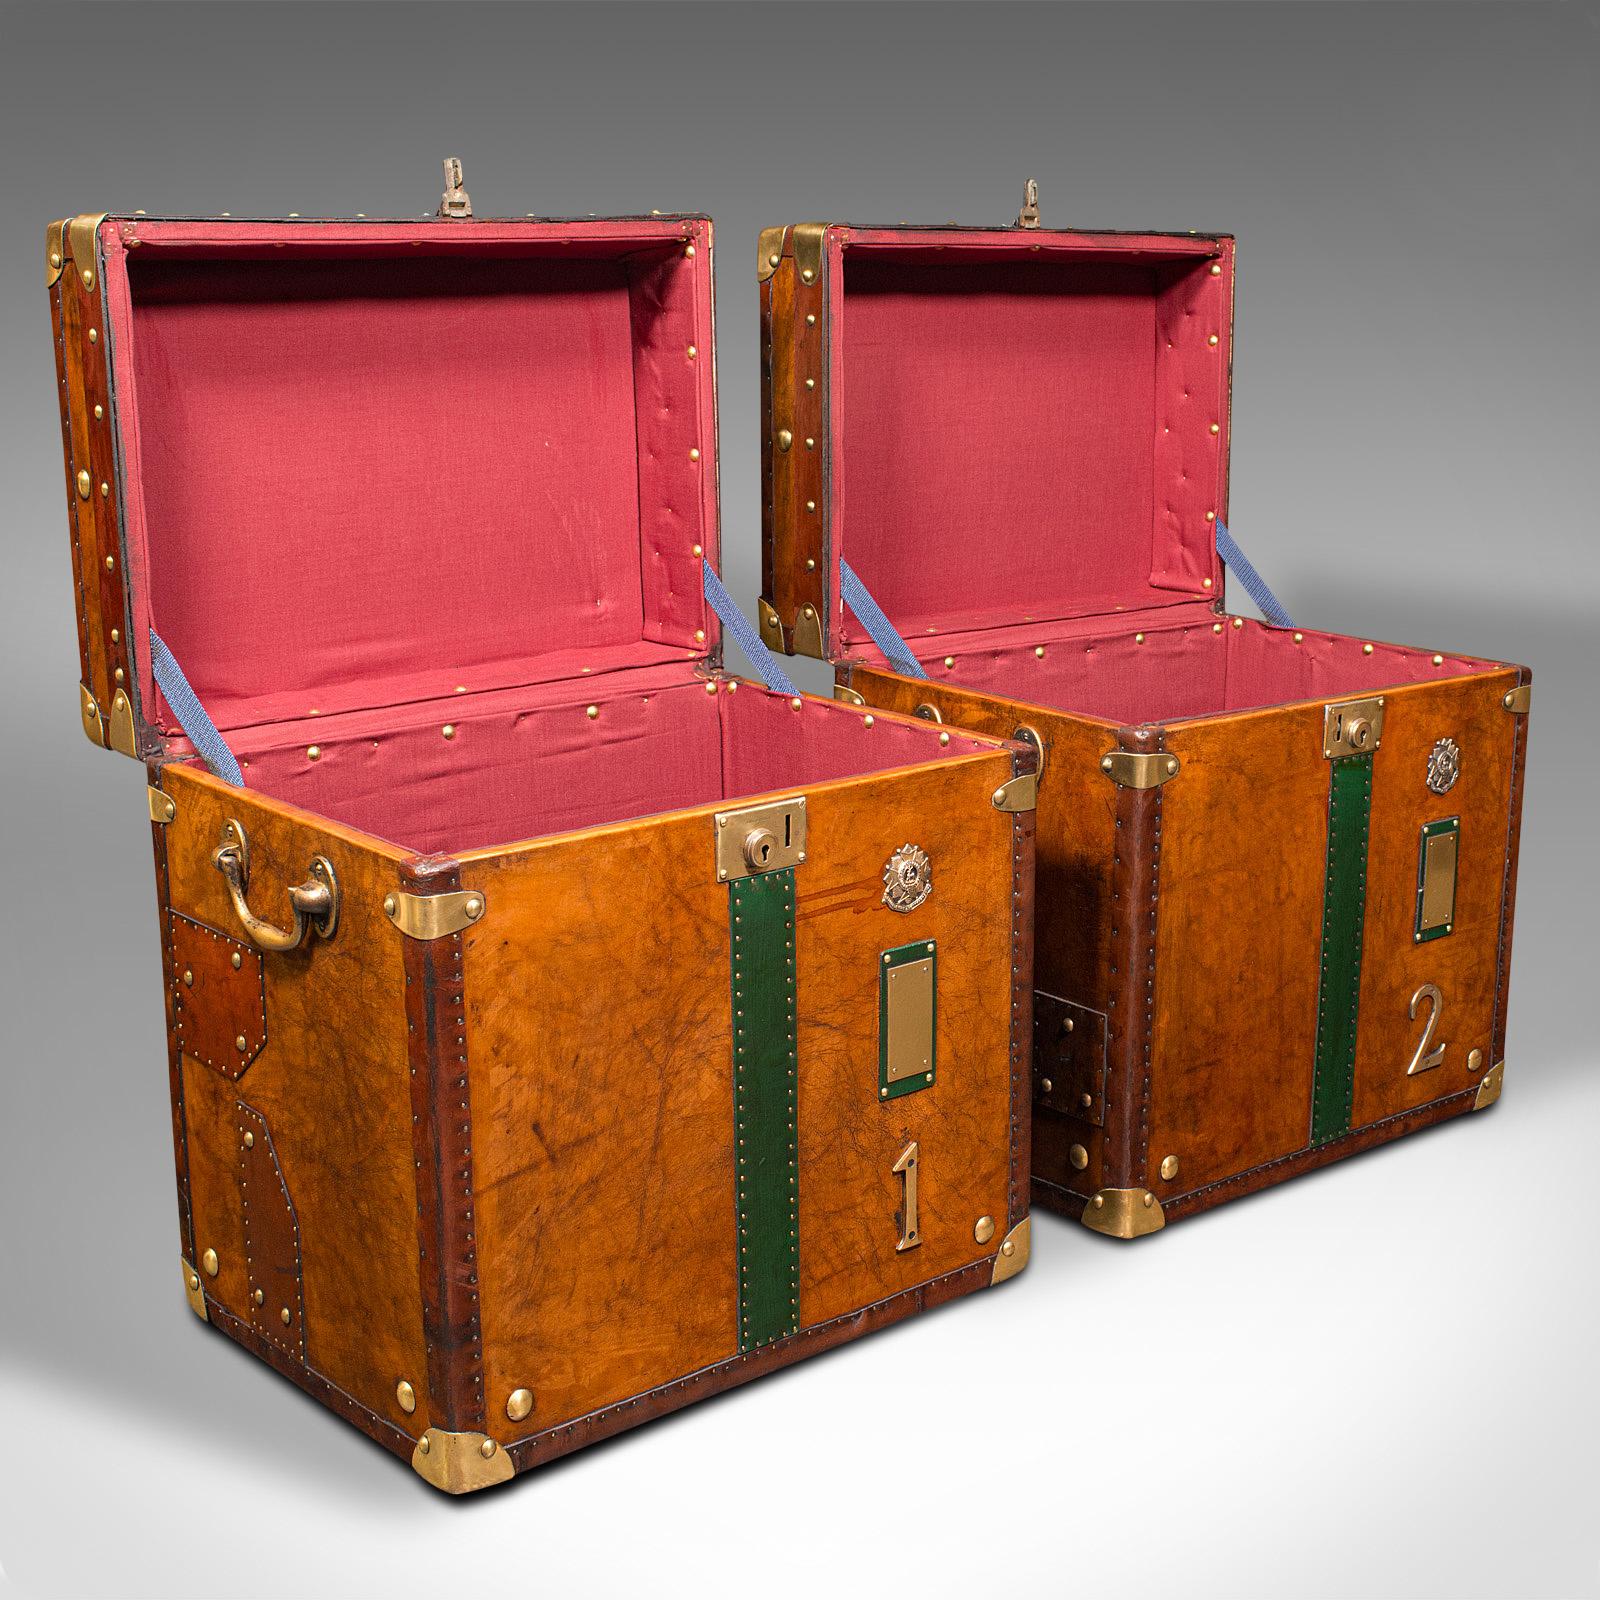 This is a pair of vintage officer's campaign luggage cases. An English, leather and brass bedside nightstand, dating to the mid 20th century, circa 1950.
 
Superb casework, with beautifully appointed detail and finishes
Displaying a desirable aged